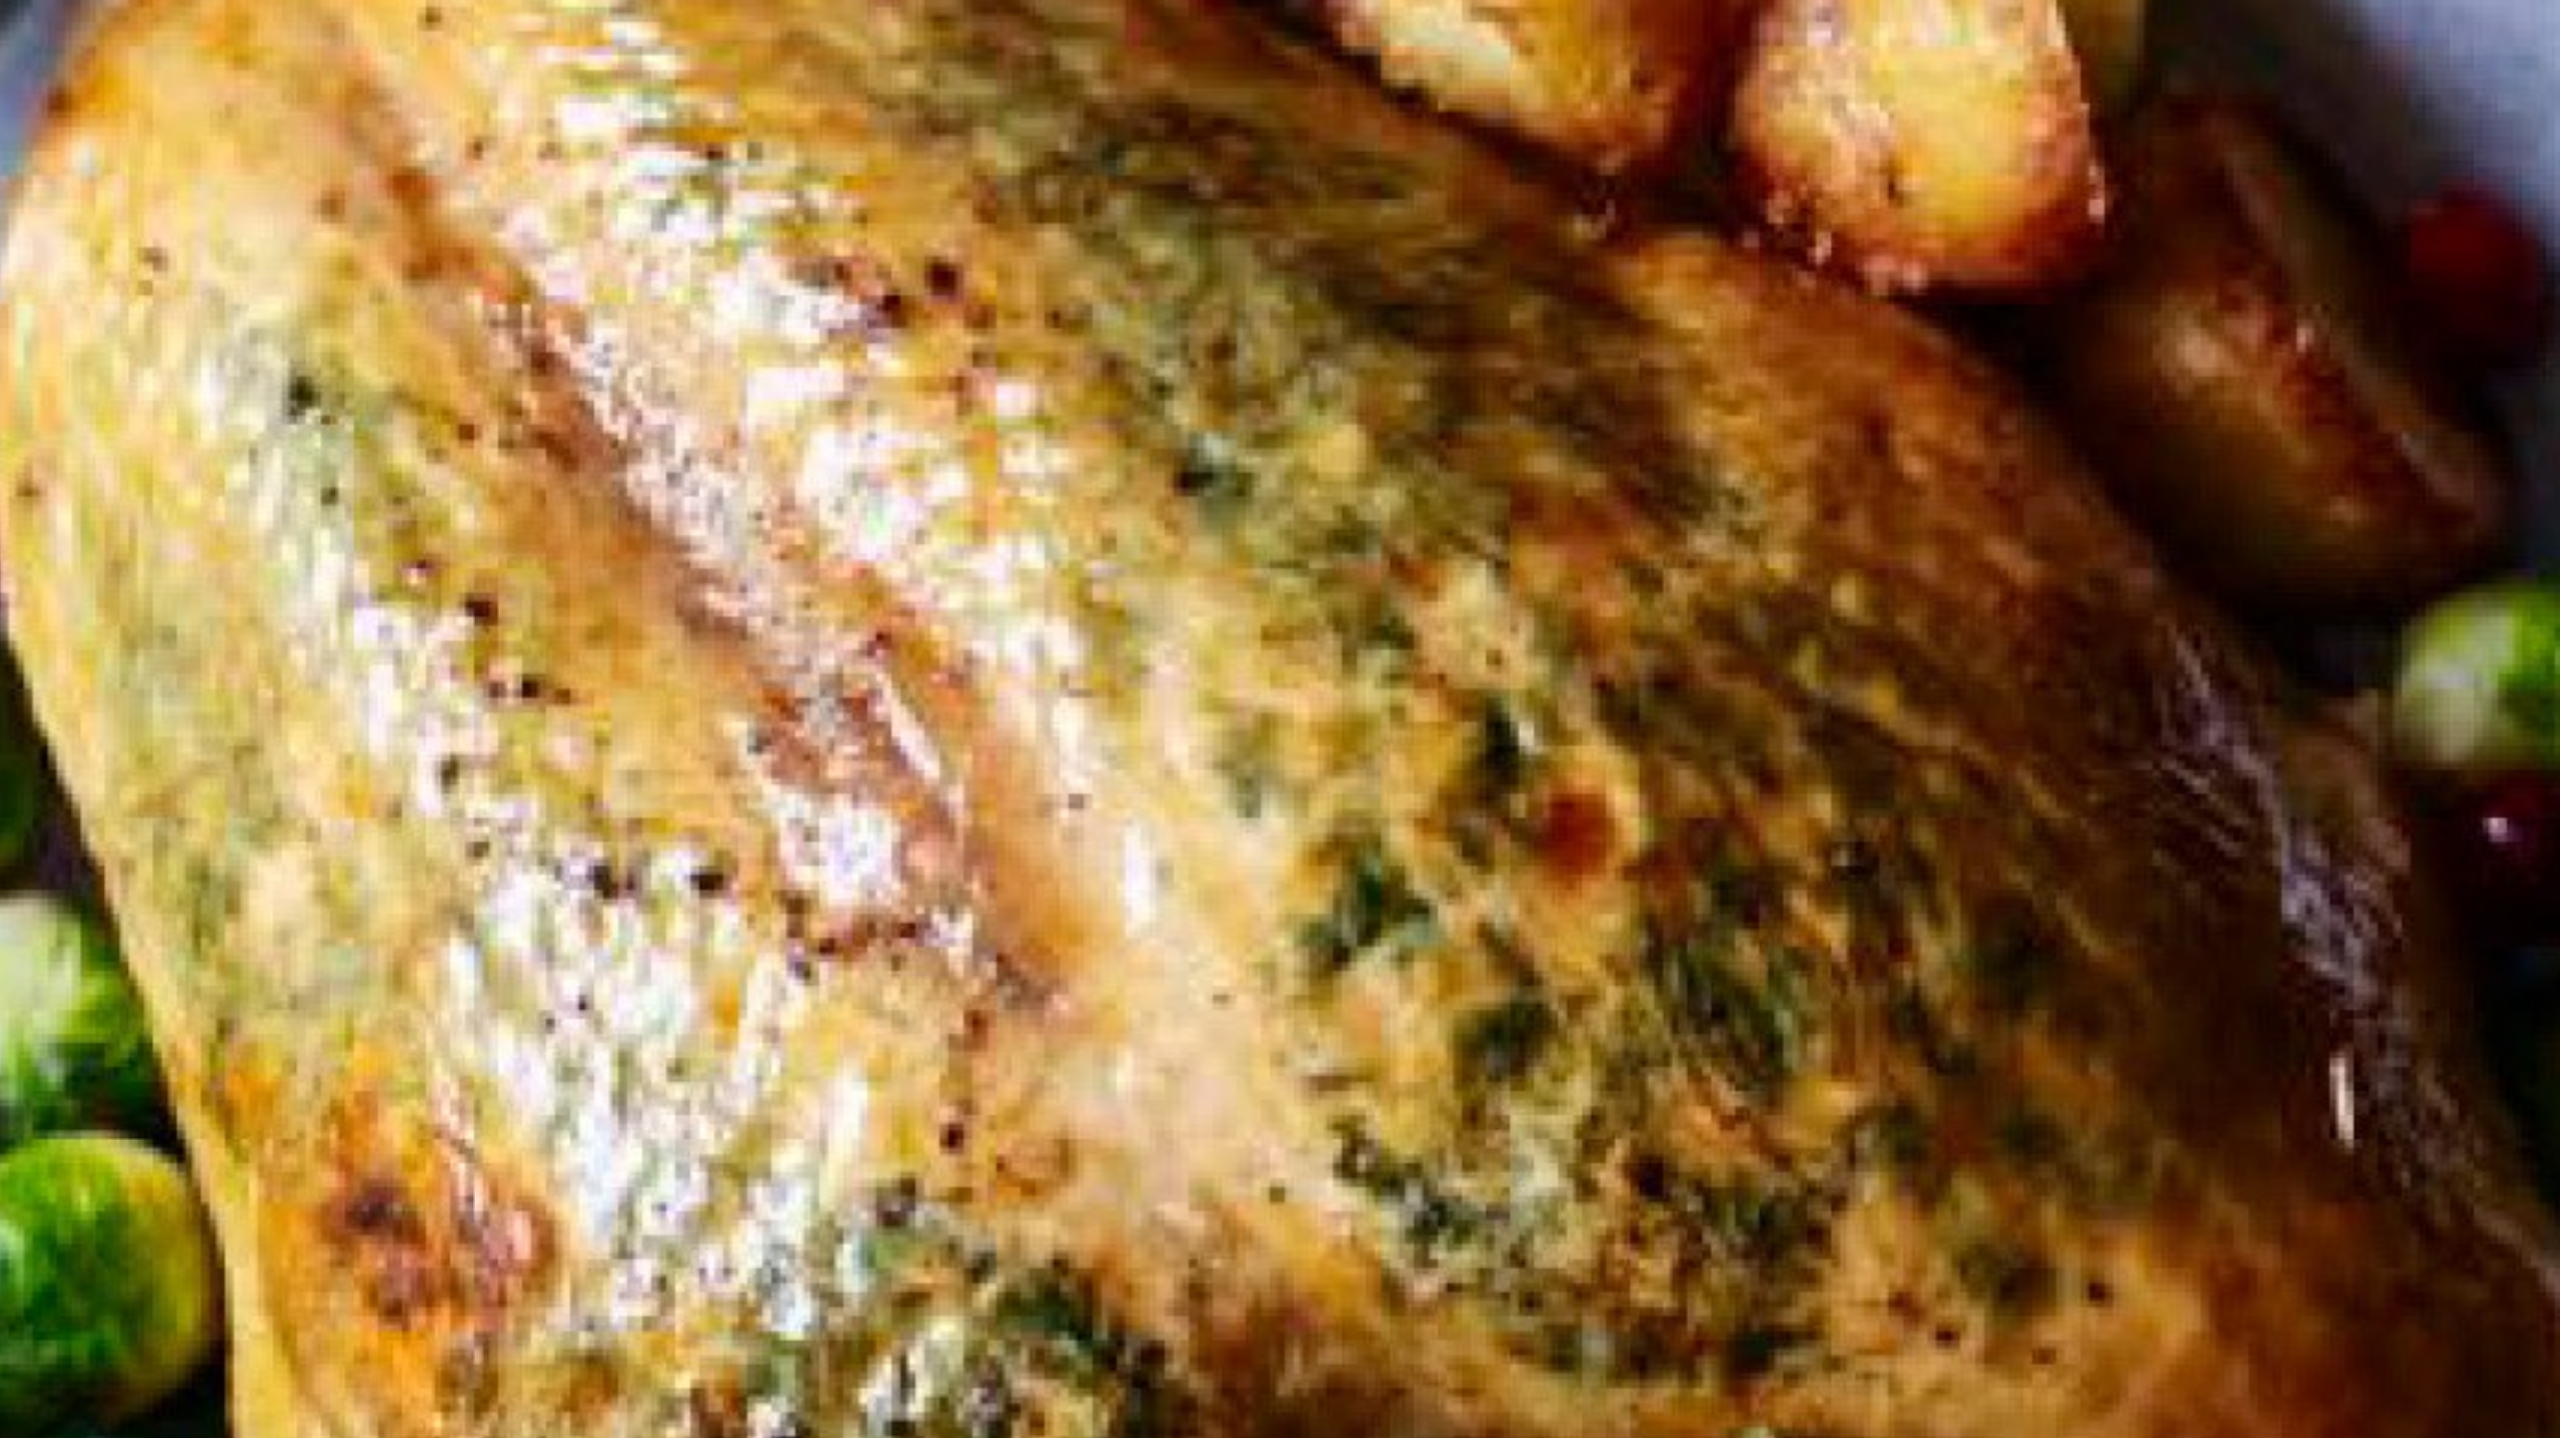 Roast Turkey Buffe with Nut Stuffing and Herb Butter